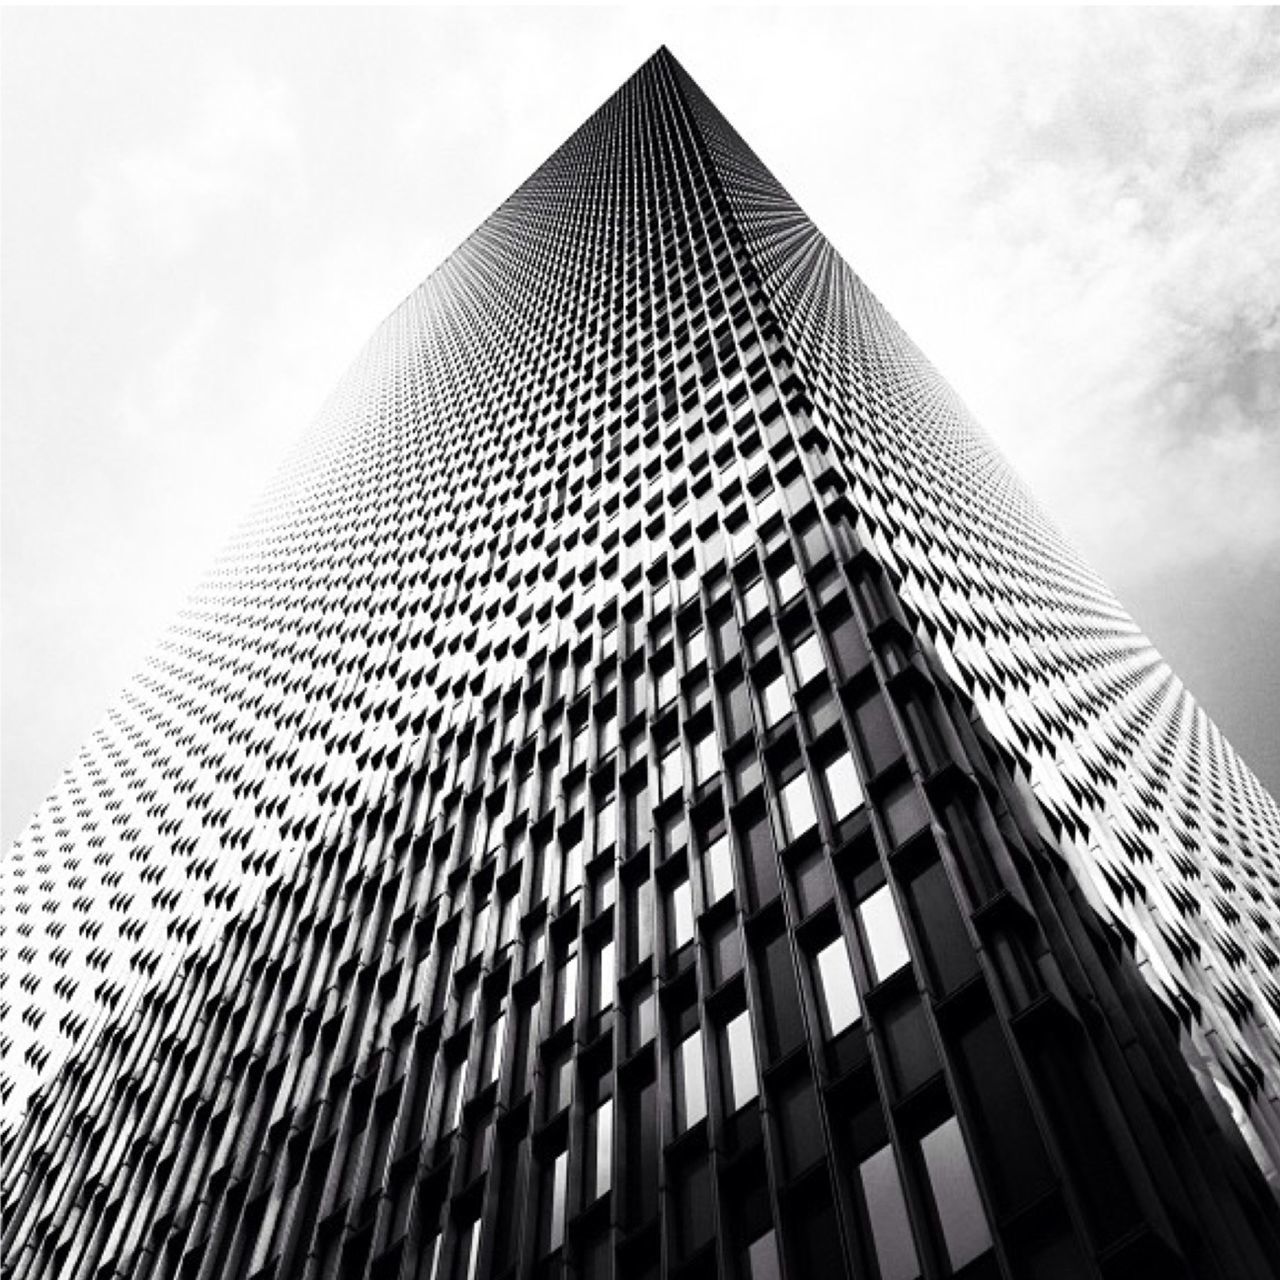 low angle view, modern, building exterior, skyscraper, architecture, built structure, tall - high, office building, sky, city, tower, building, glass - material, tall, cloud - sky, day, pattern, outdoors, no people, cloud